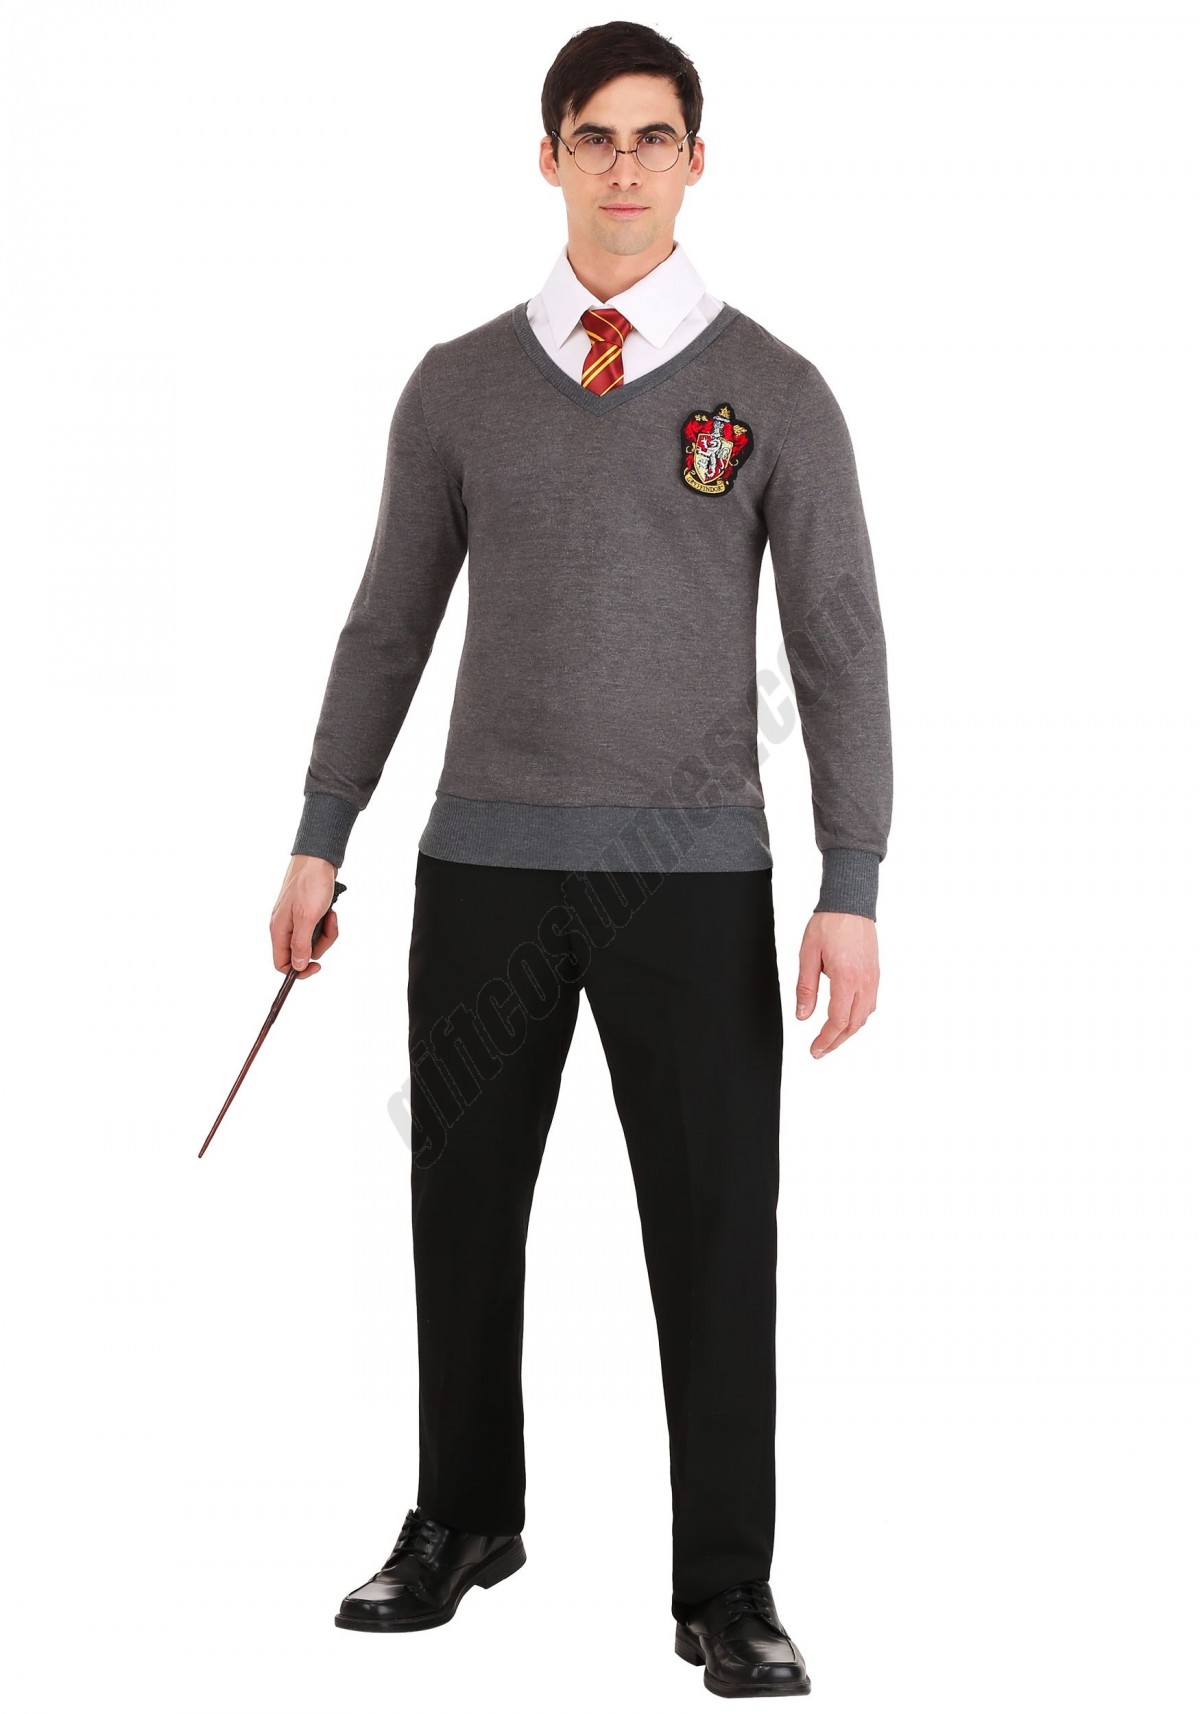 Deluxe Harry Potter Costume for Adults Promotions - -4